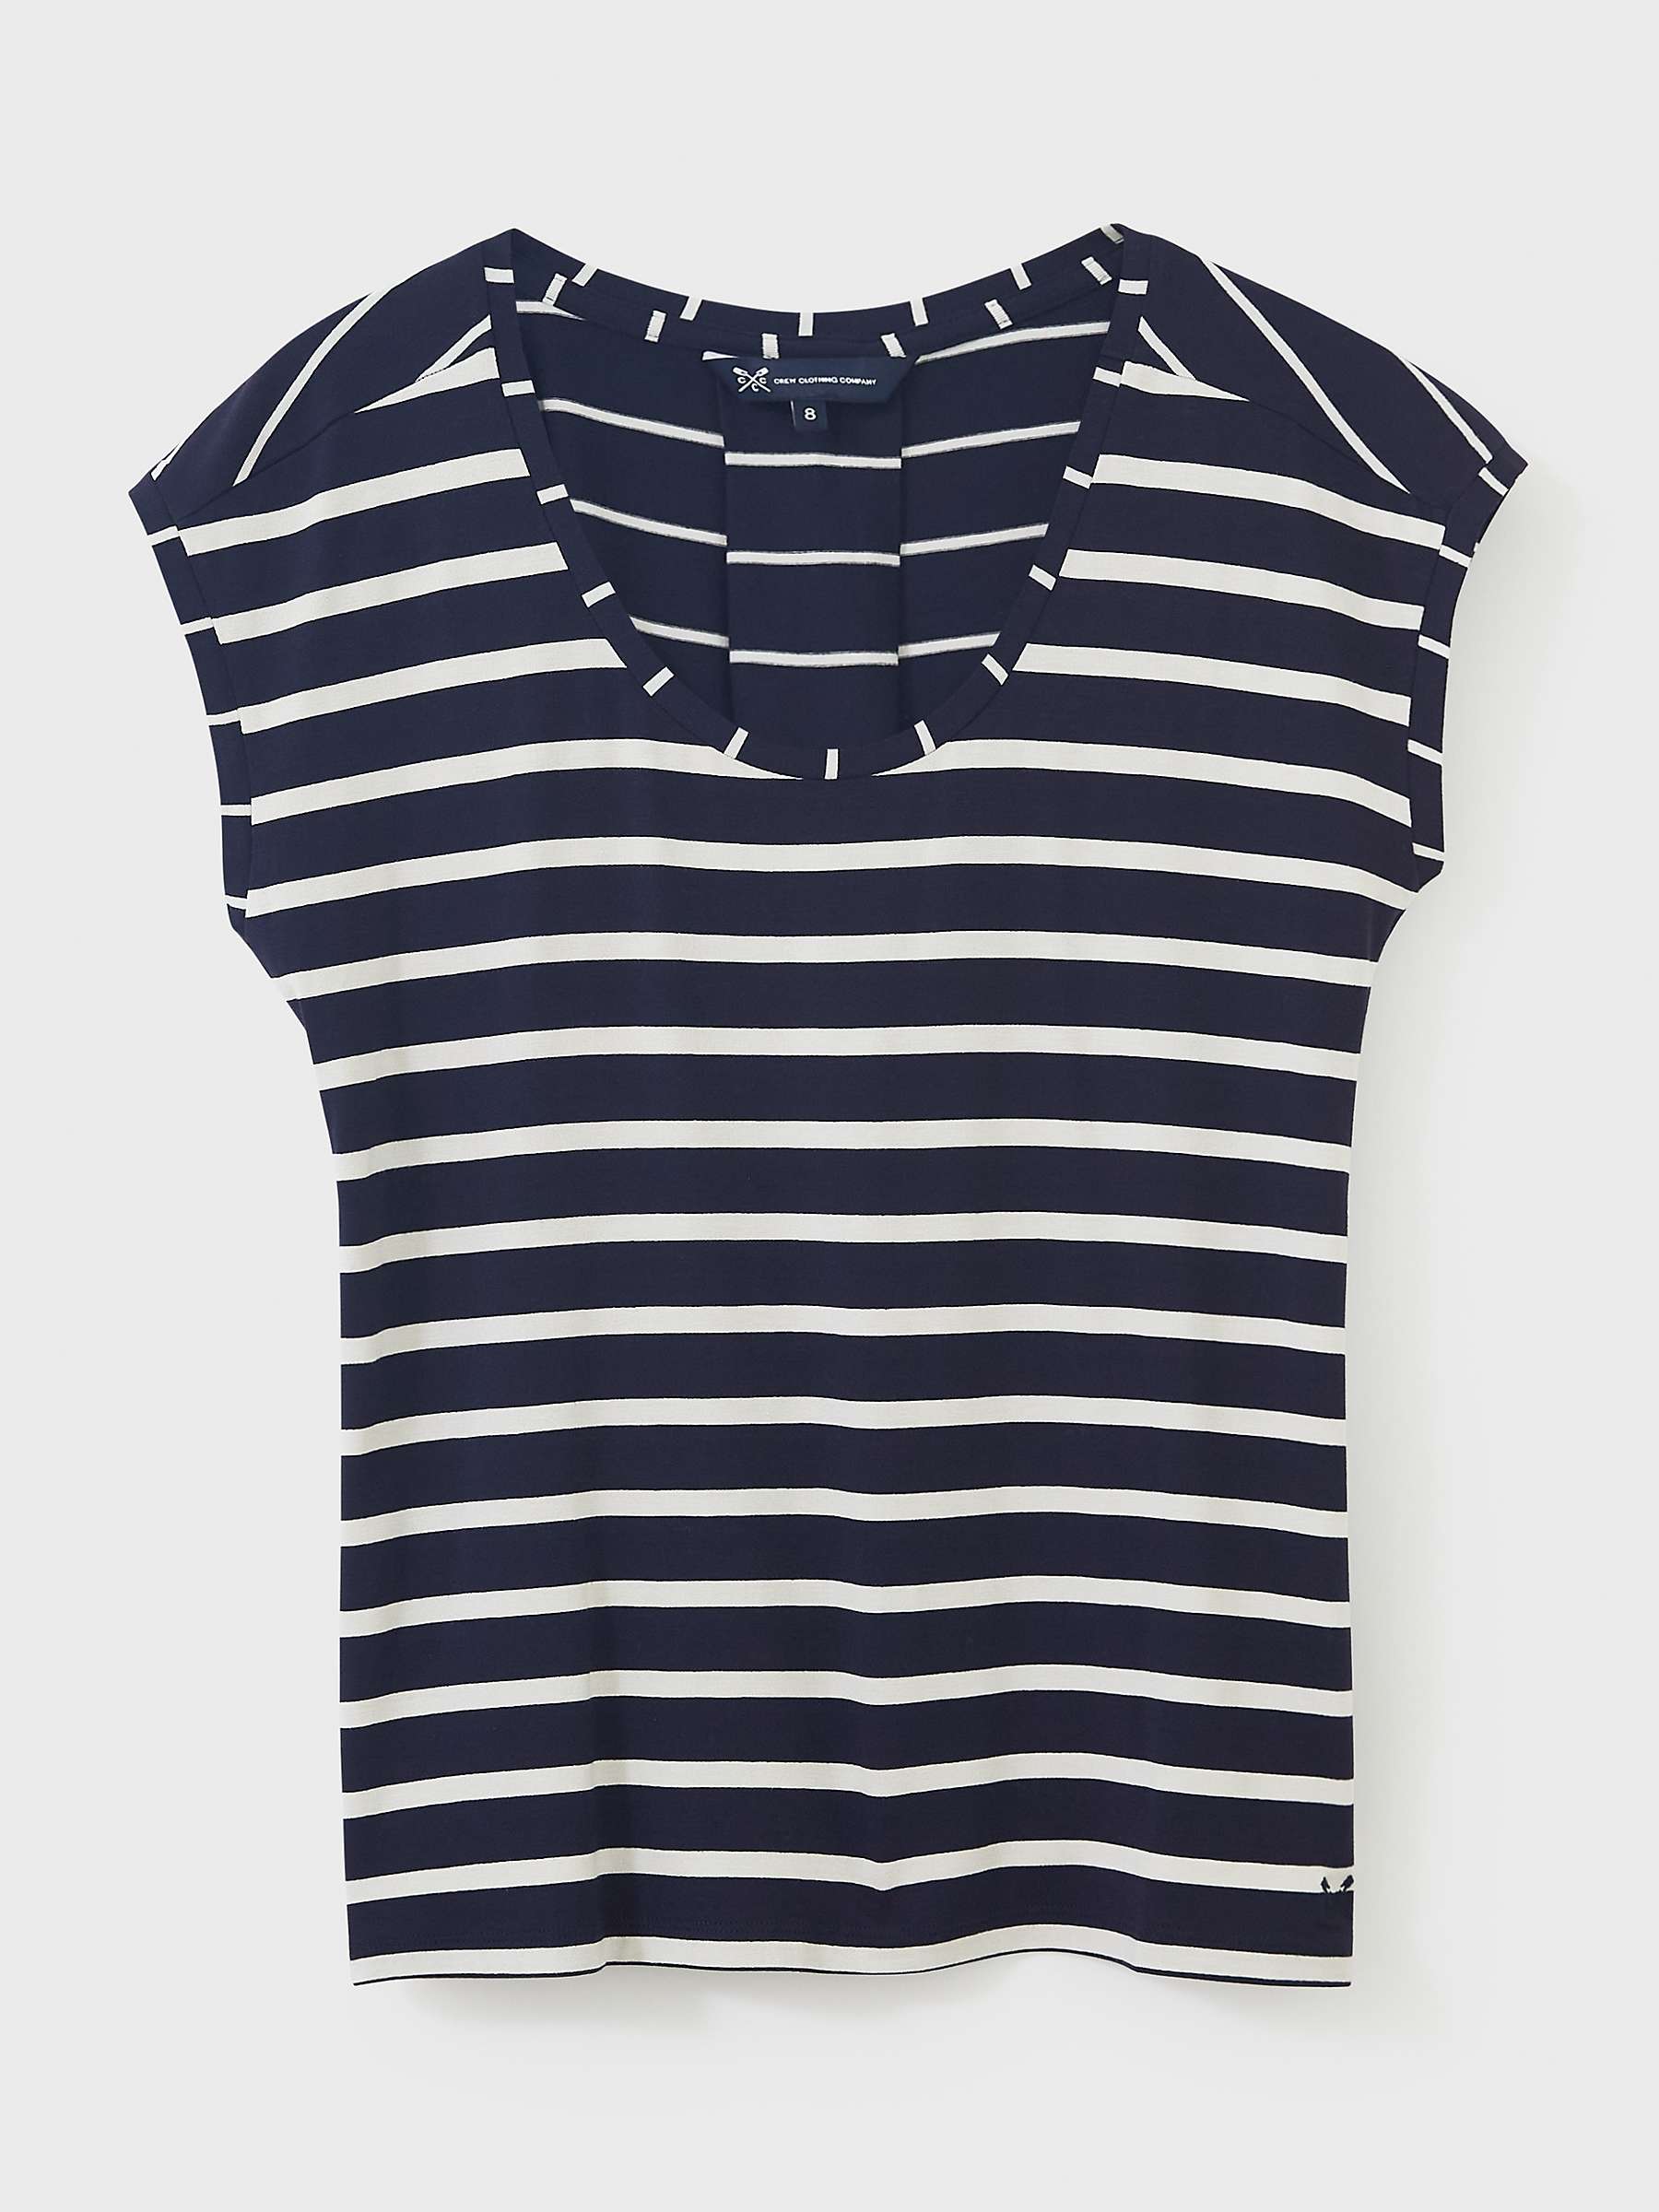 Buy Crew Clothing Striped T-Shirt, Navy Online at johnlewis.com